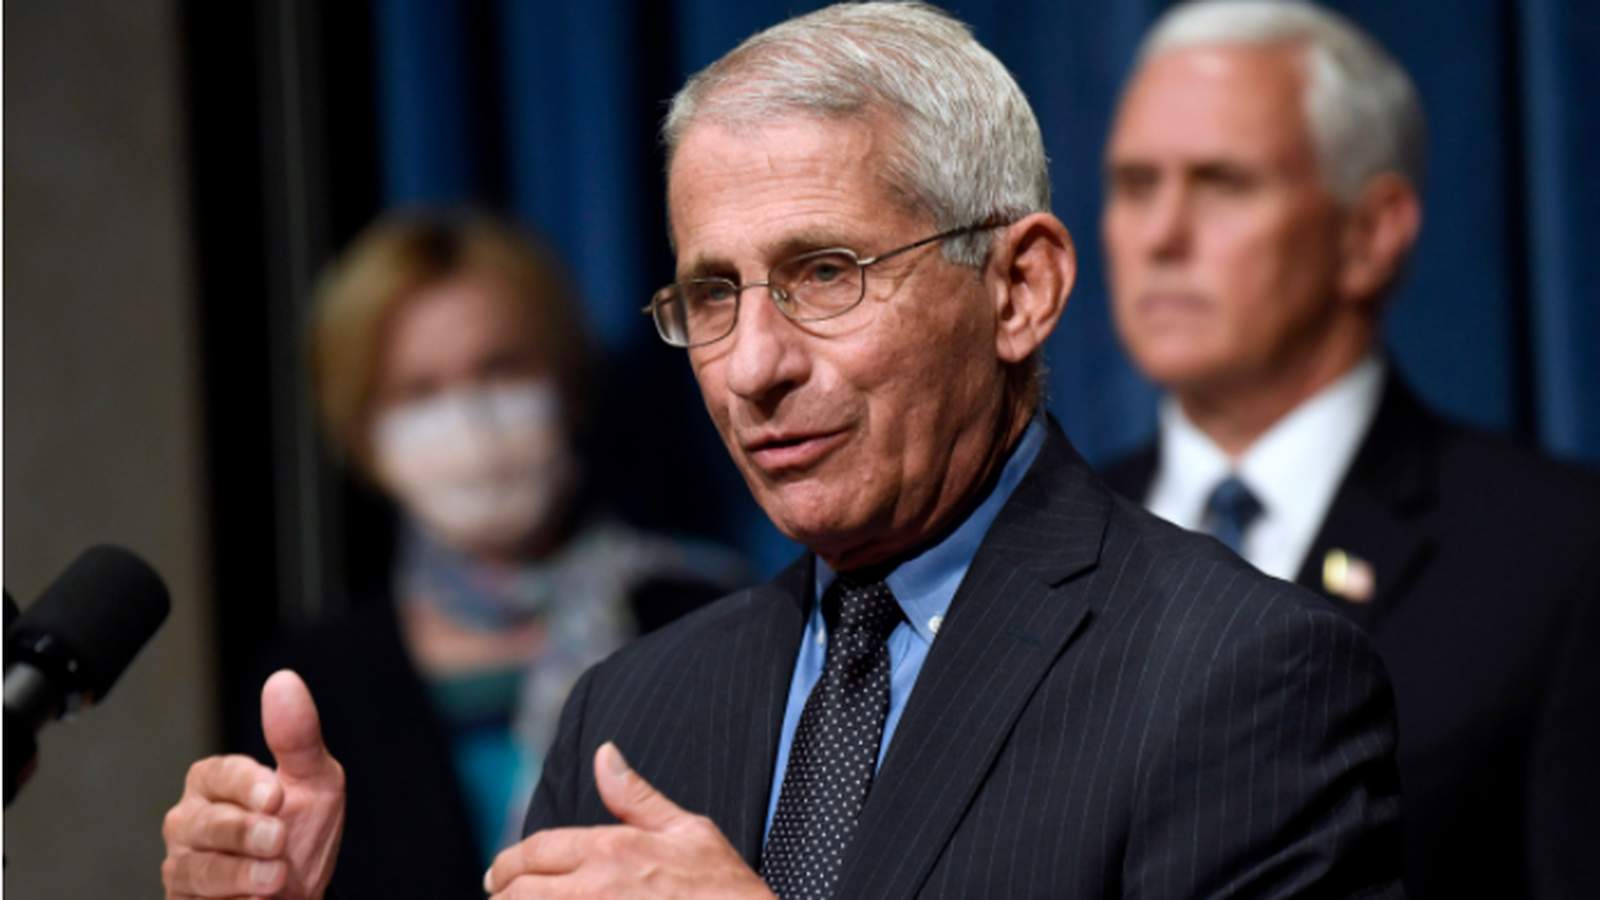 WATCH LIVE: Dr. Fauci to discuss reopening schools, businesses amid coronavirus pandemic